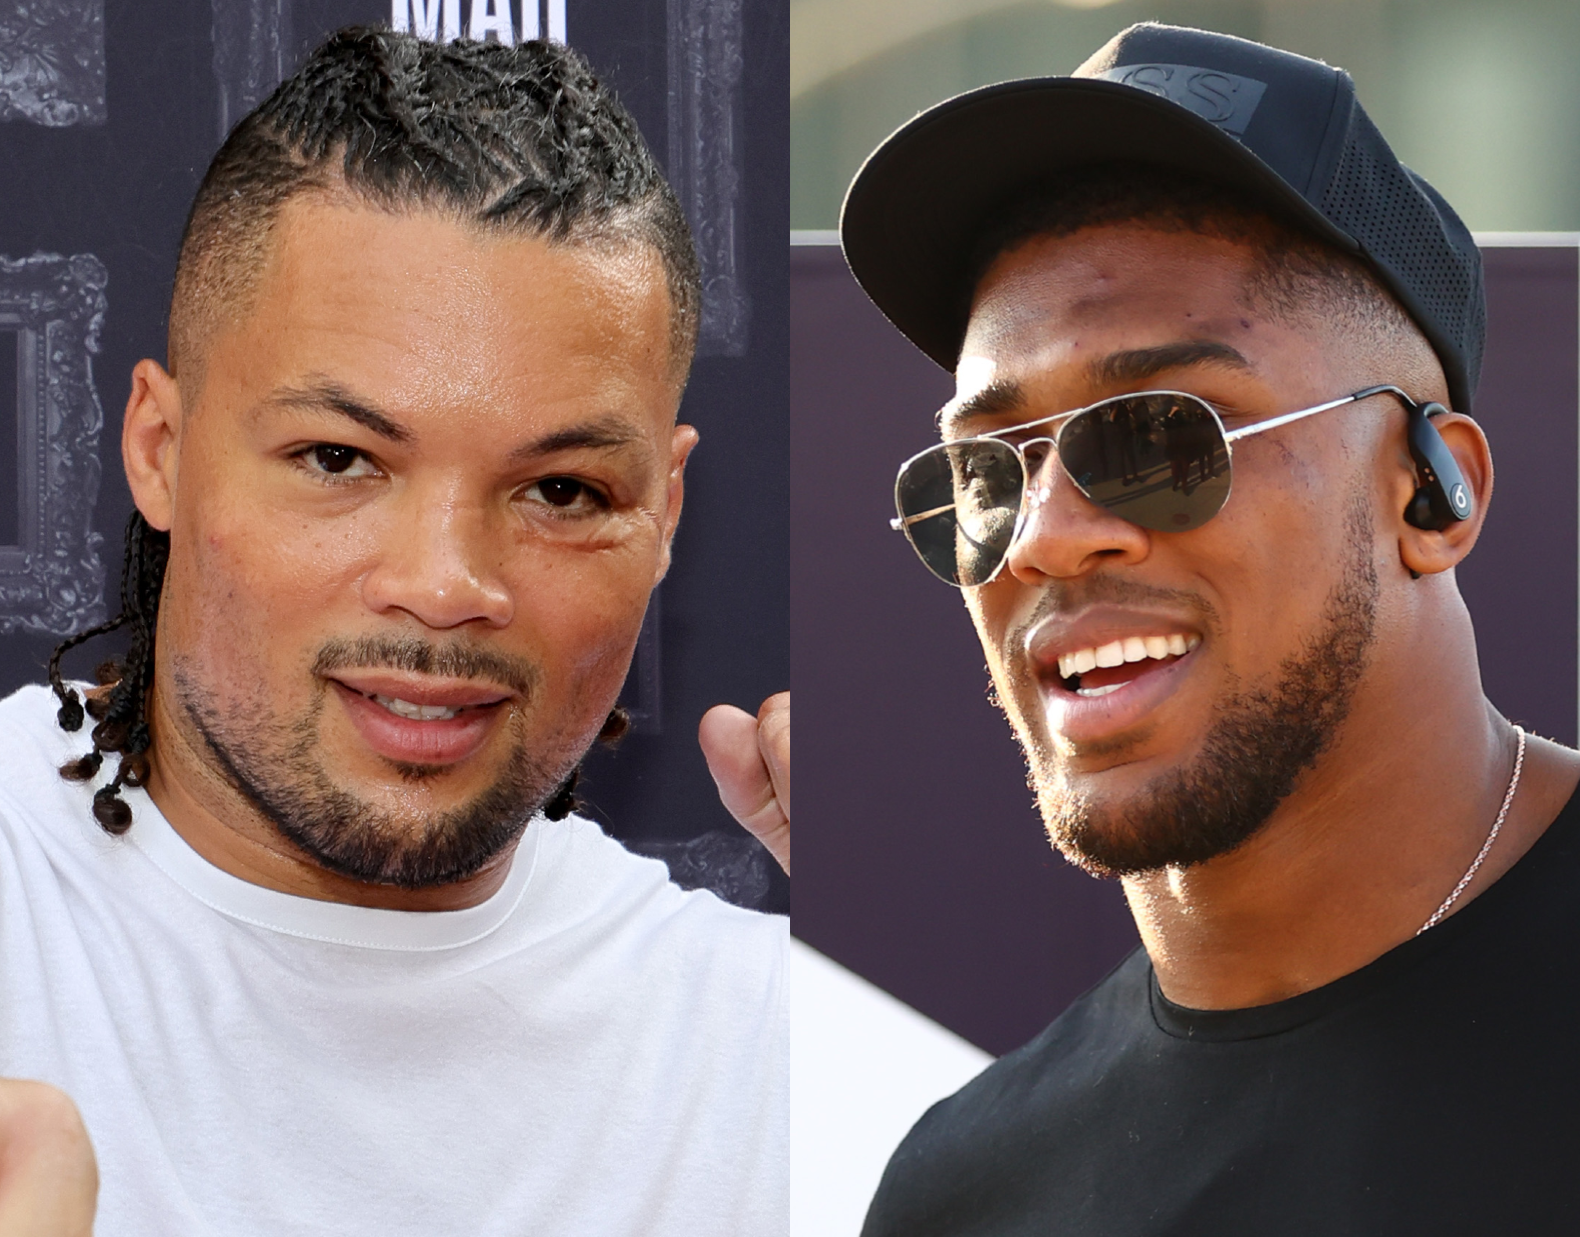 Joe Joyce doesn’t think Anthony Joshua has the hunger for boxing anymore